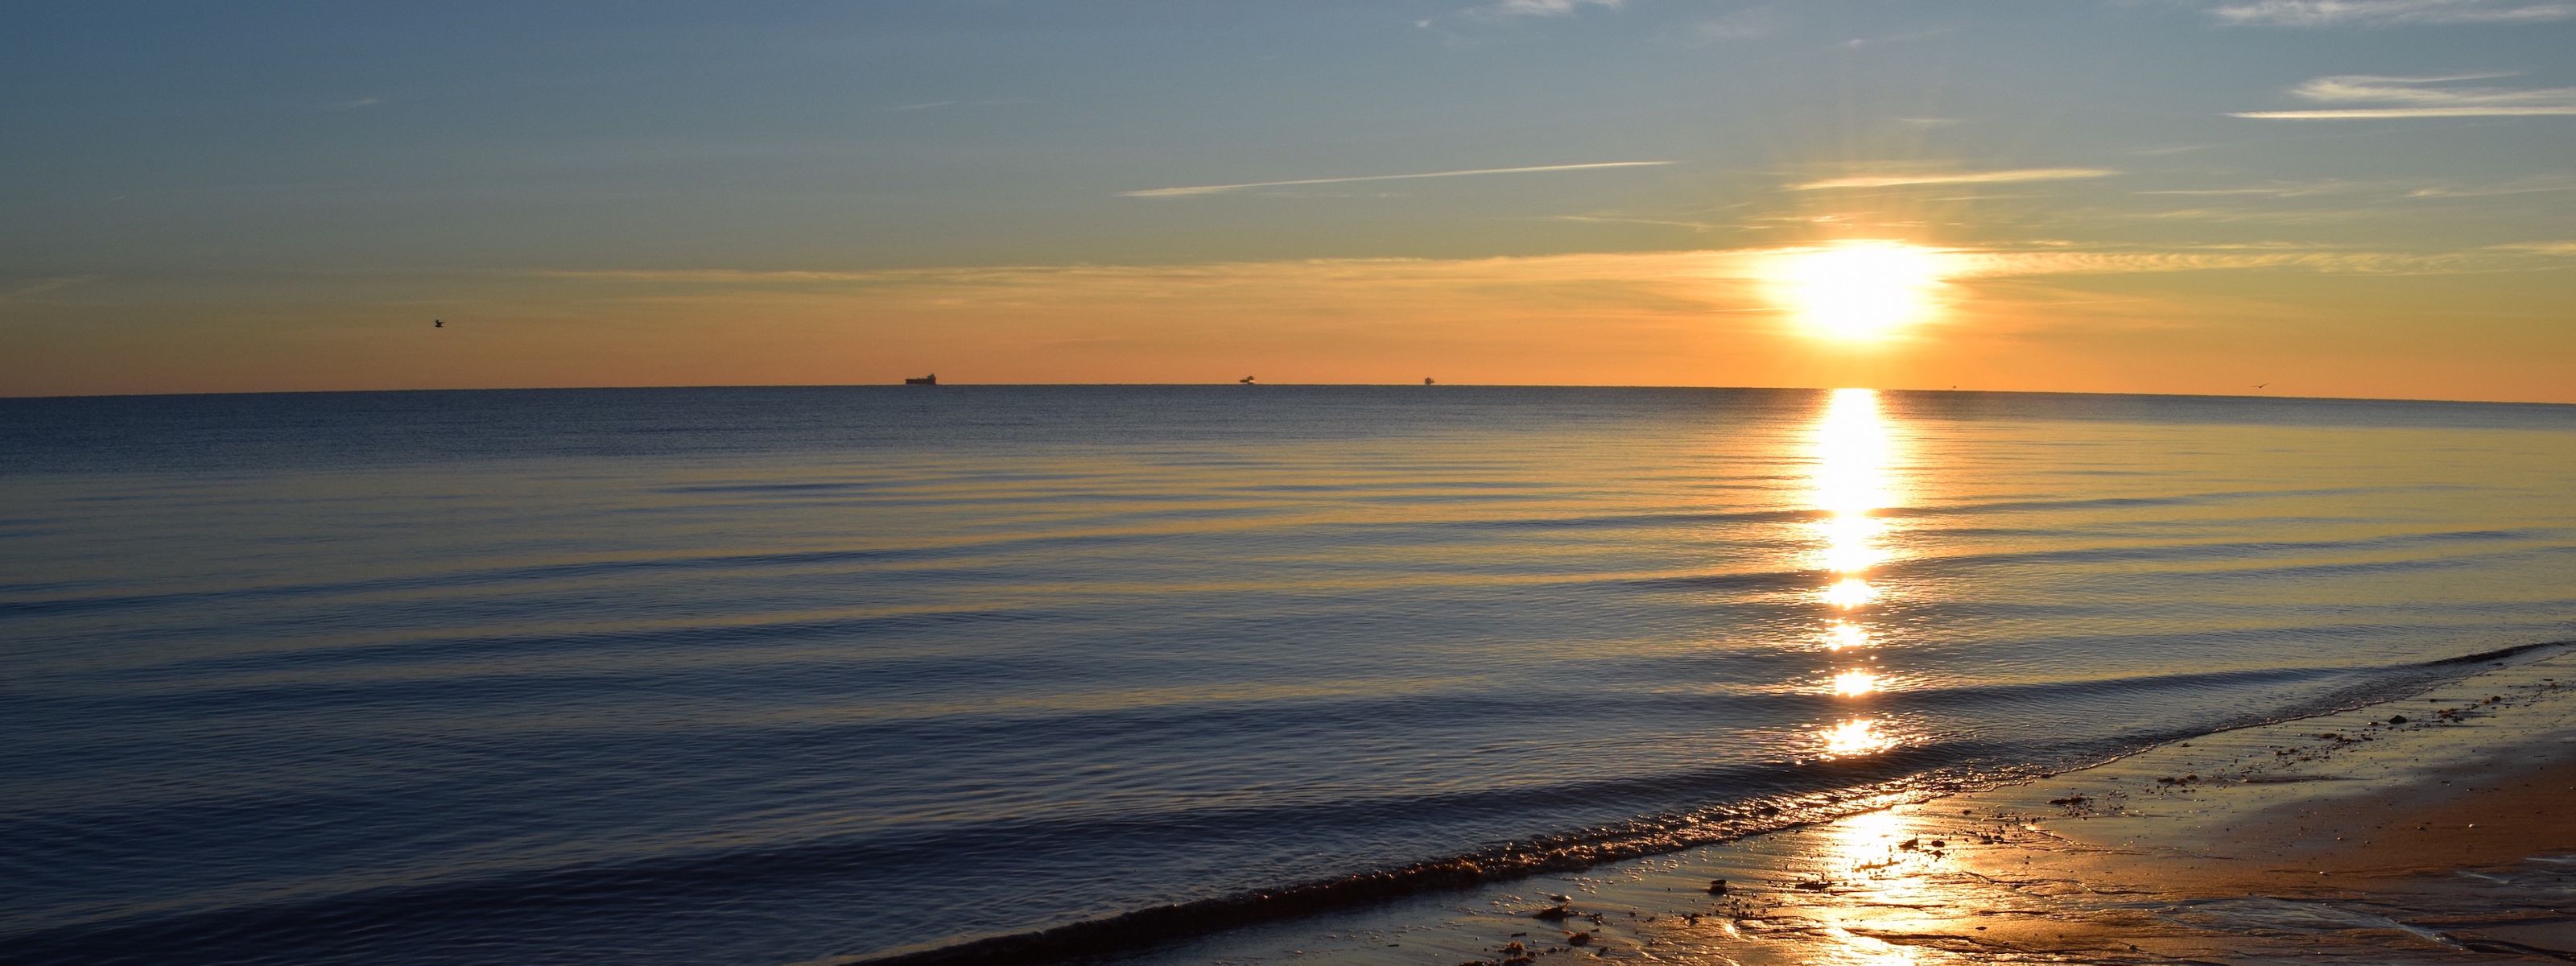 The sun sets over the wide expanse of Delaware Bay as the water gently laps the sandy shore.